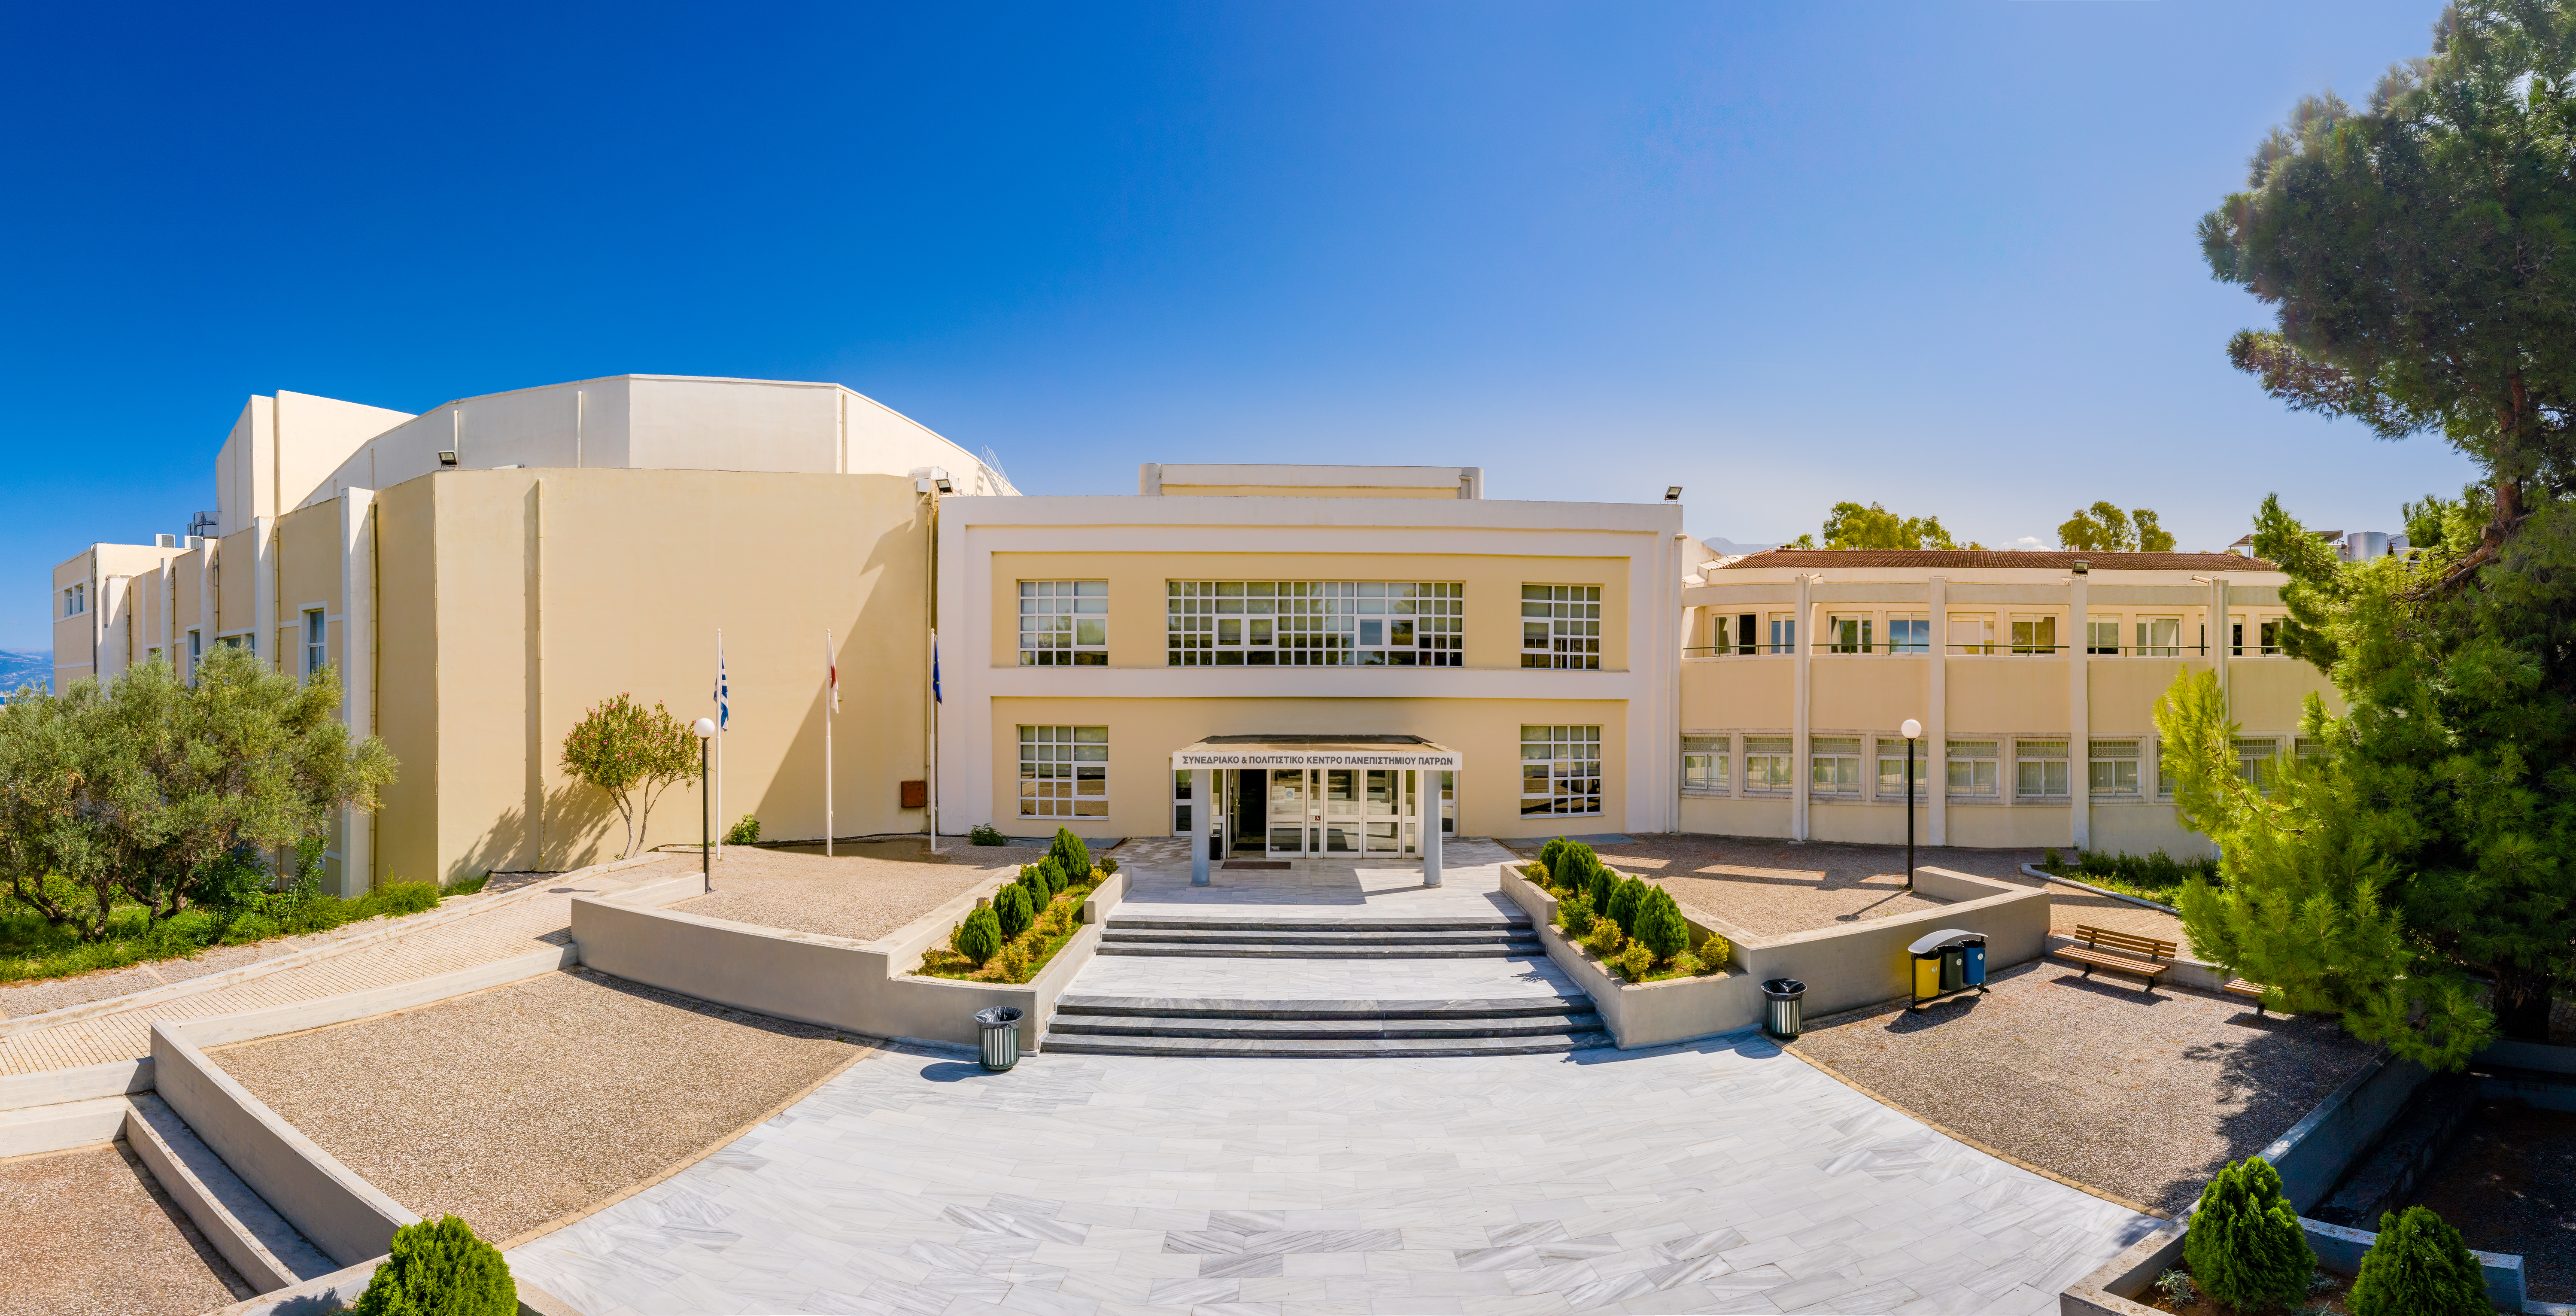 Conference and Cultural Centre of University of Patras